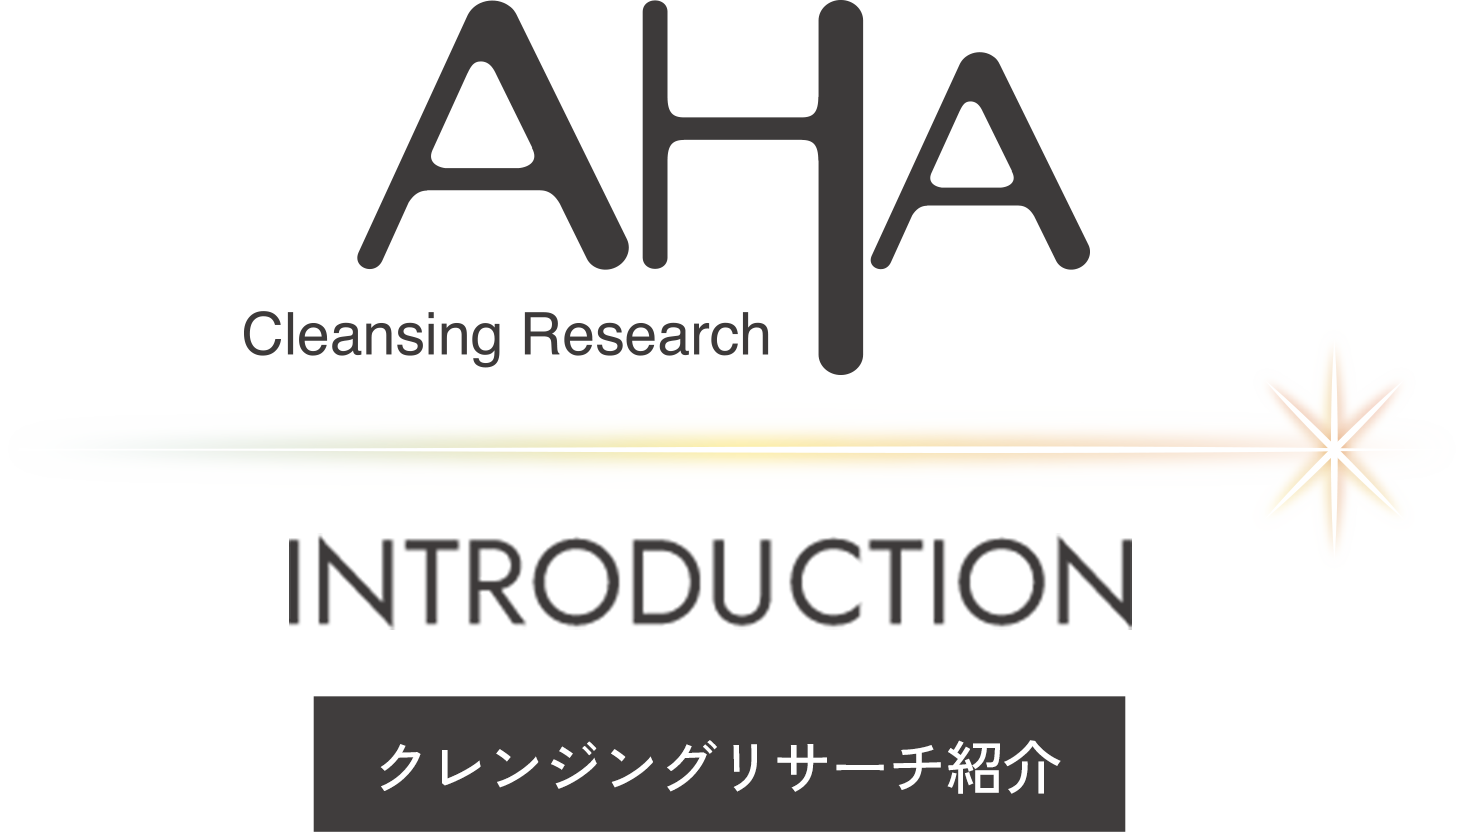 AHA Cleansing Research INTRODUCTION クレンジングリサーチ紹介